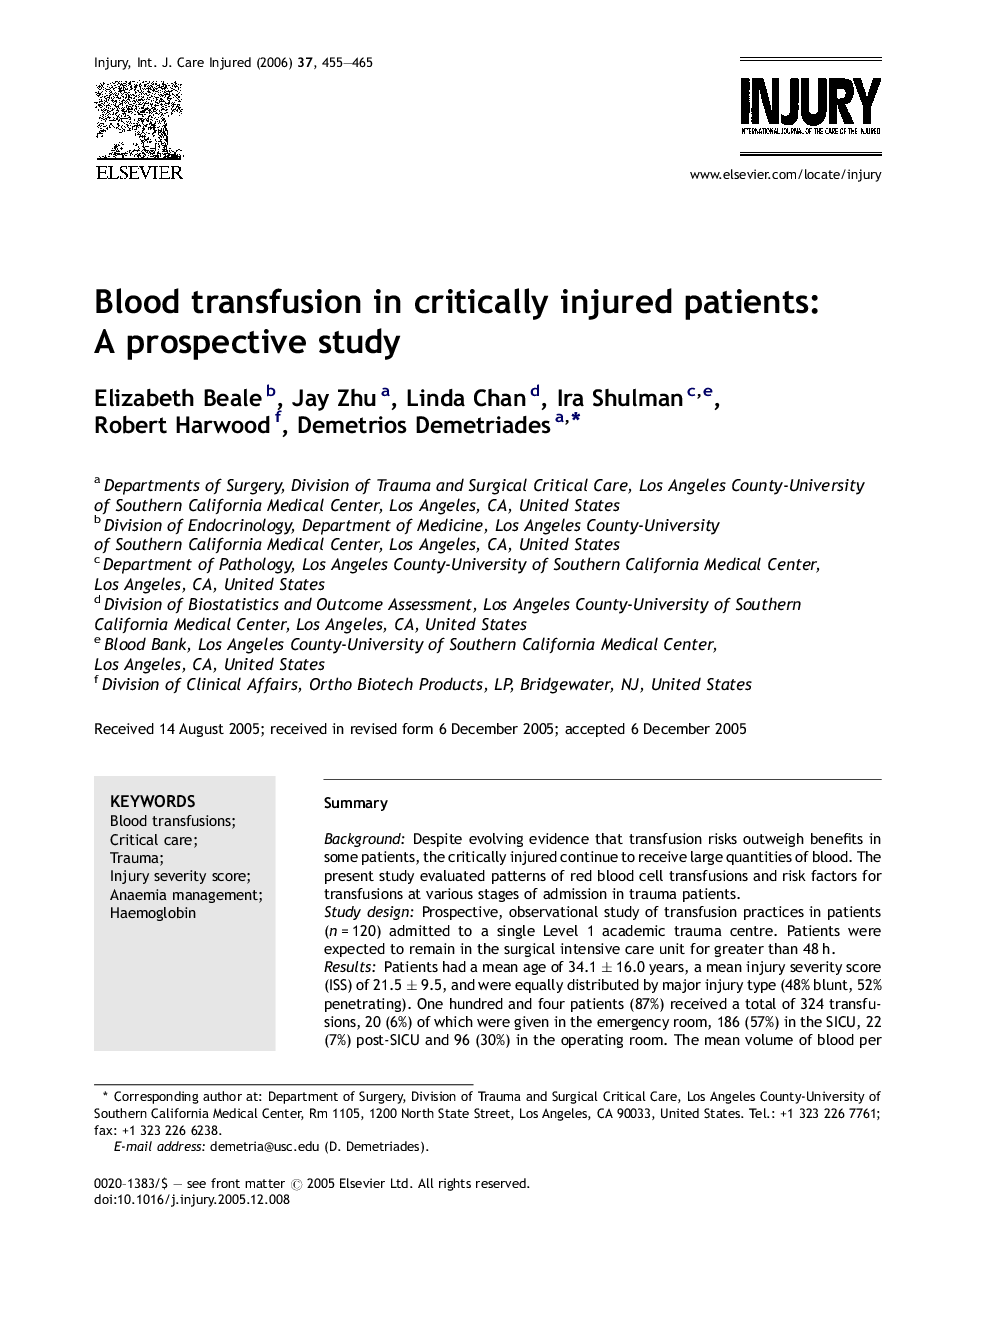 Blood transfusion in critically injured patients: A prospective study